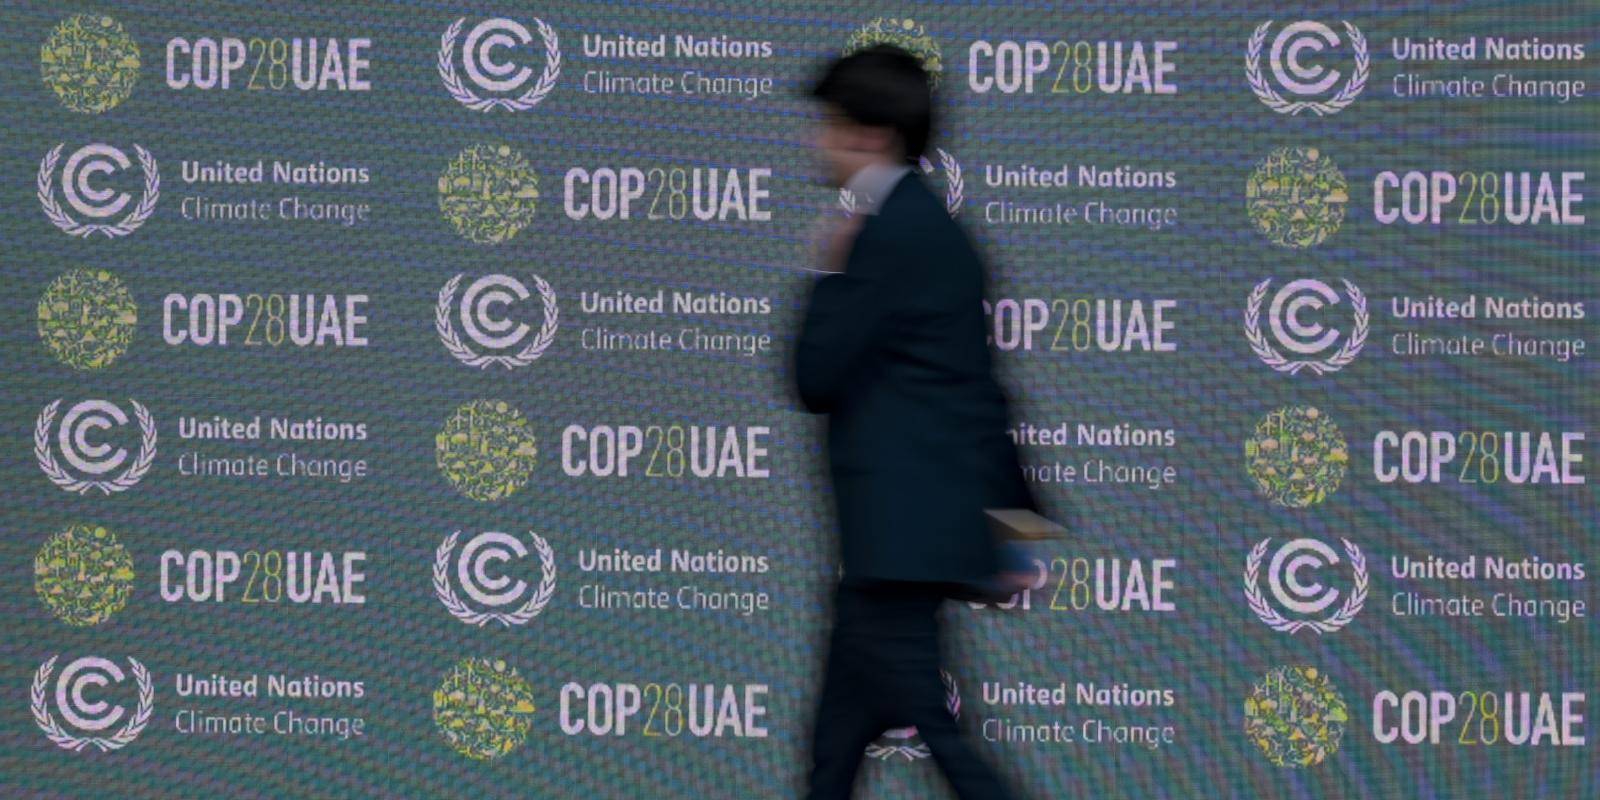 Was CoP-28 a cop-out or did the conference achieve something?